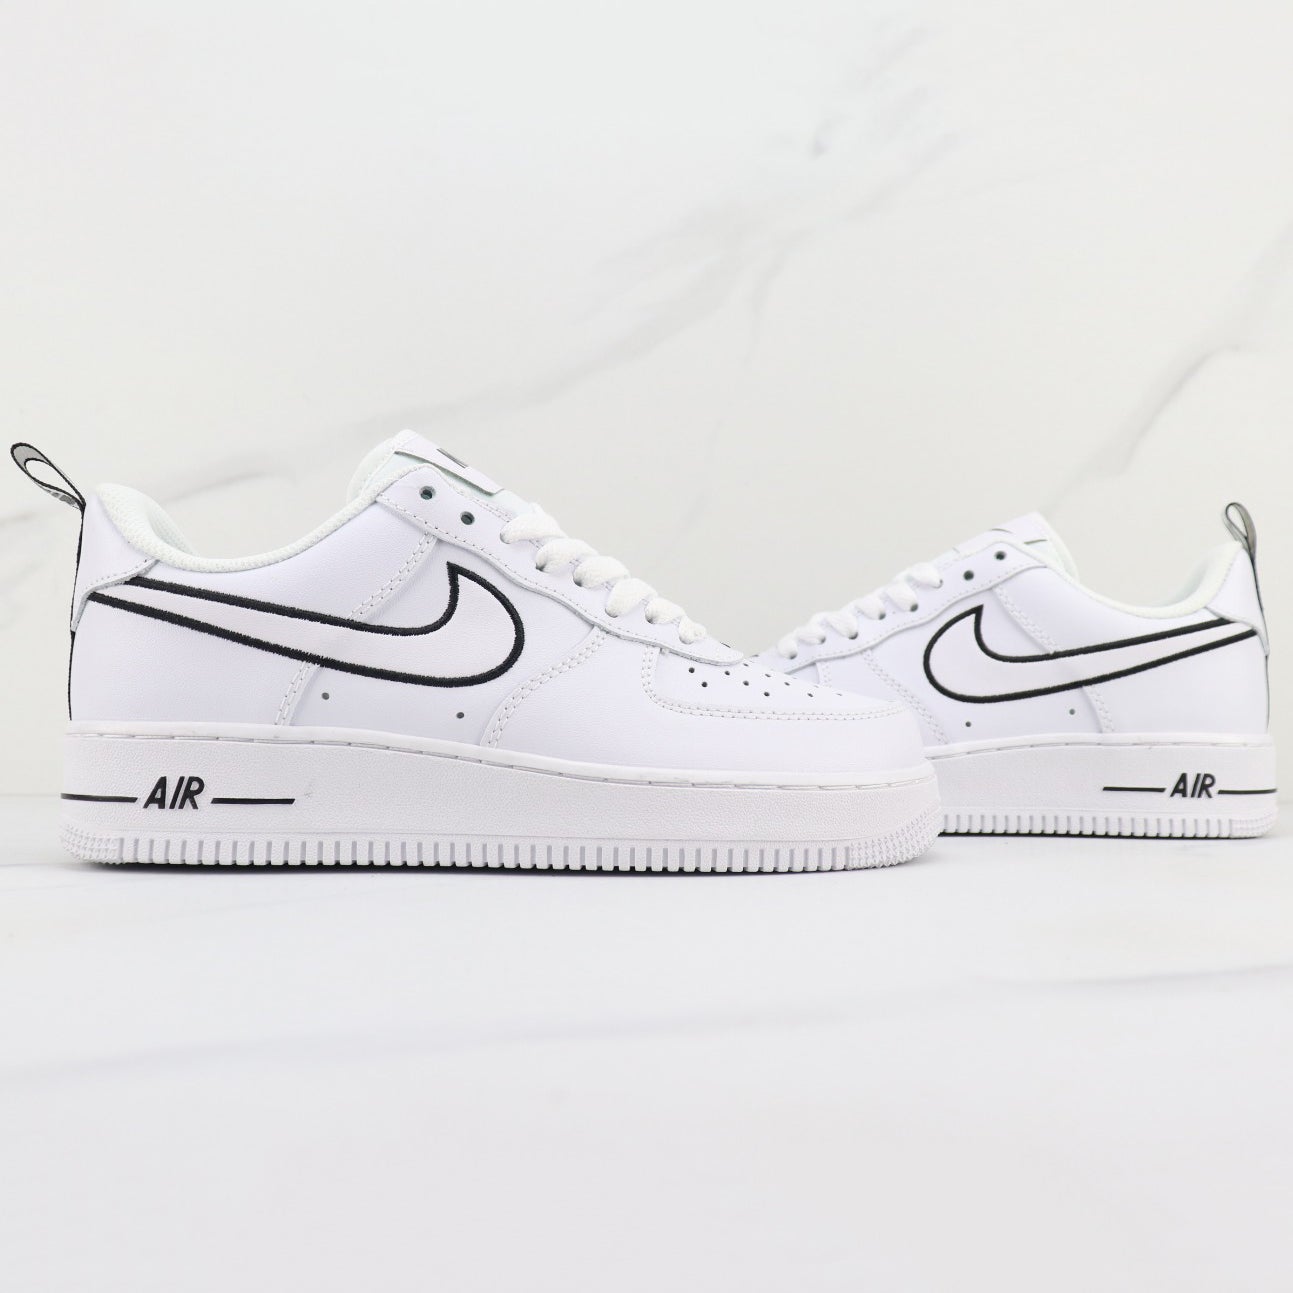 Nike Air Force 1'07 Low Top Shoes Flats Shoes Sneakers Sport